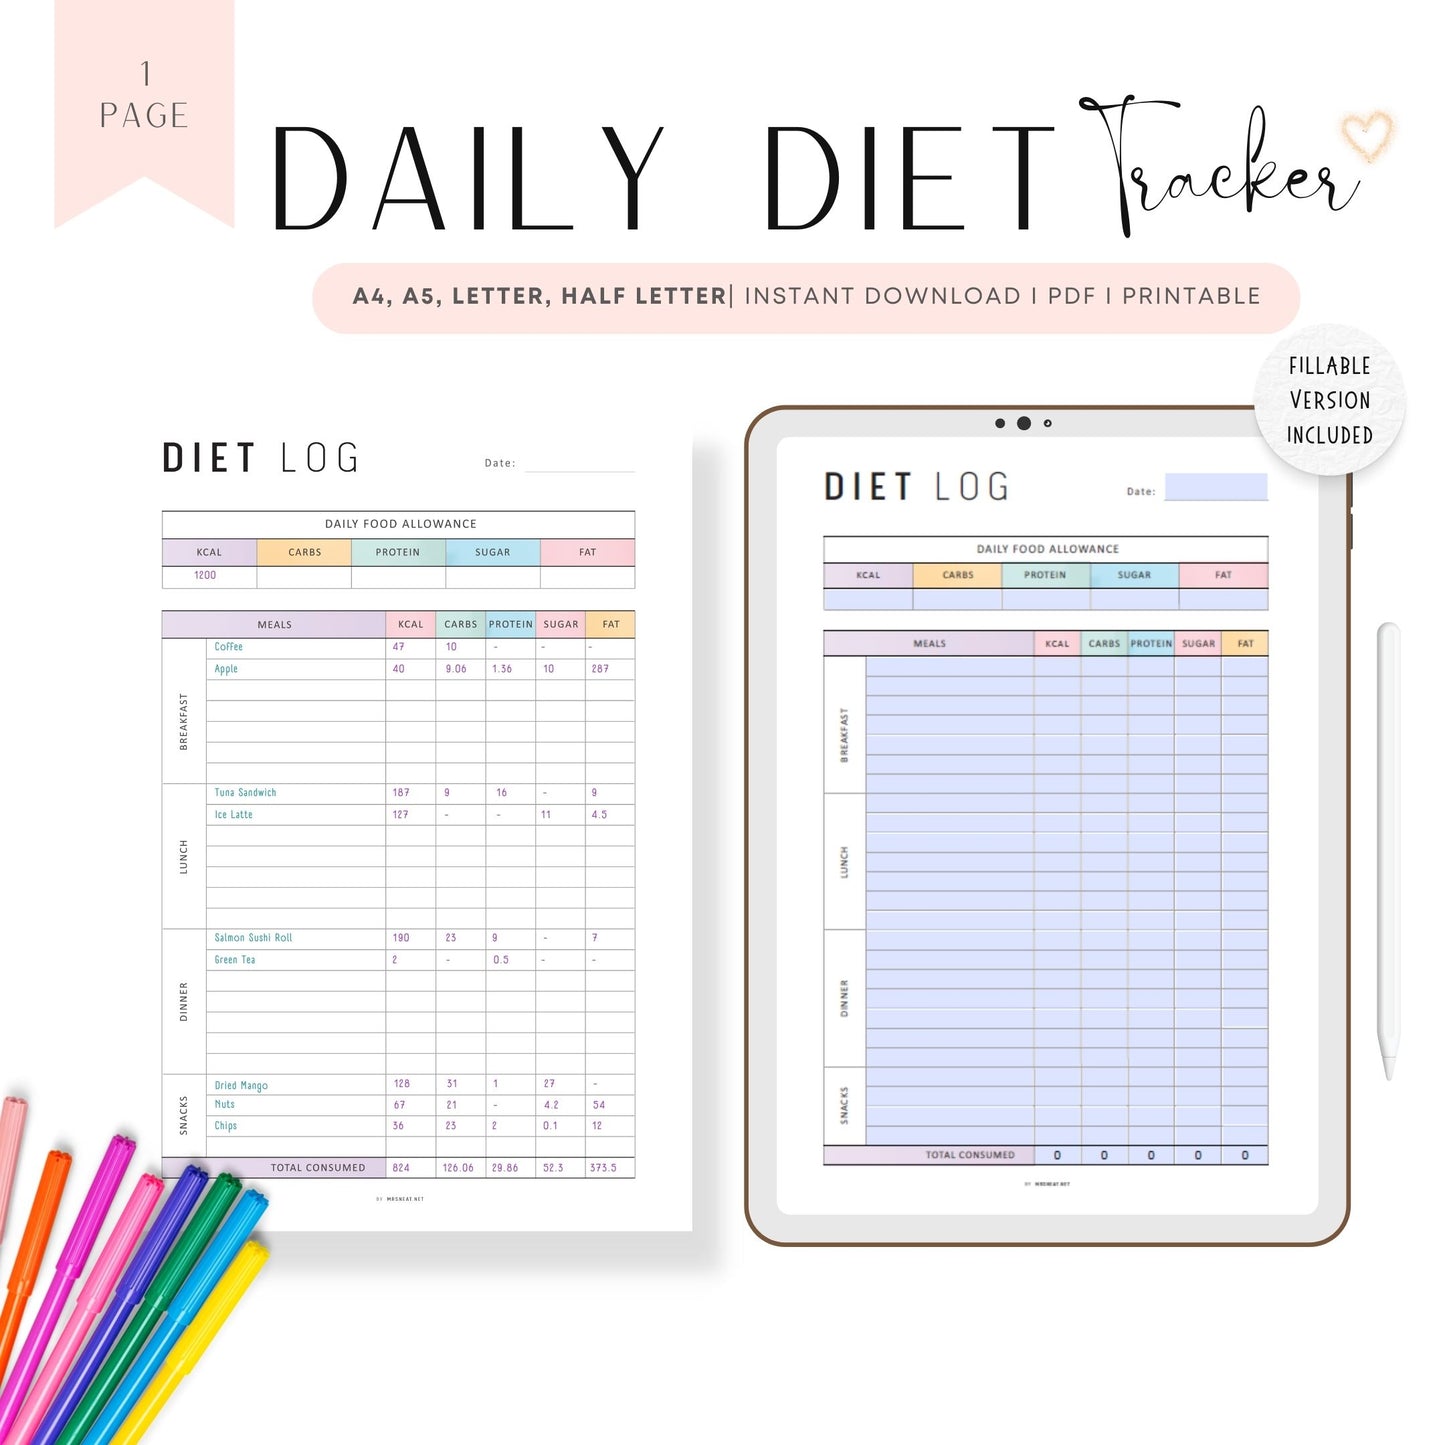 Food Diary Calorie Counting Template PDF, Diet Log Journal, Fillable Food Diary, A4, A5, Letter, Half Letter, Colorful Page